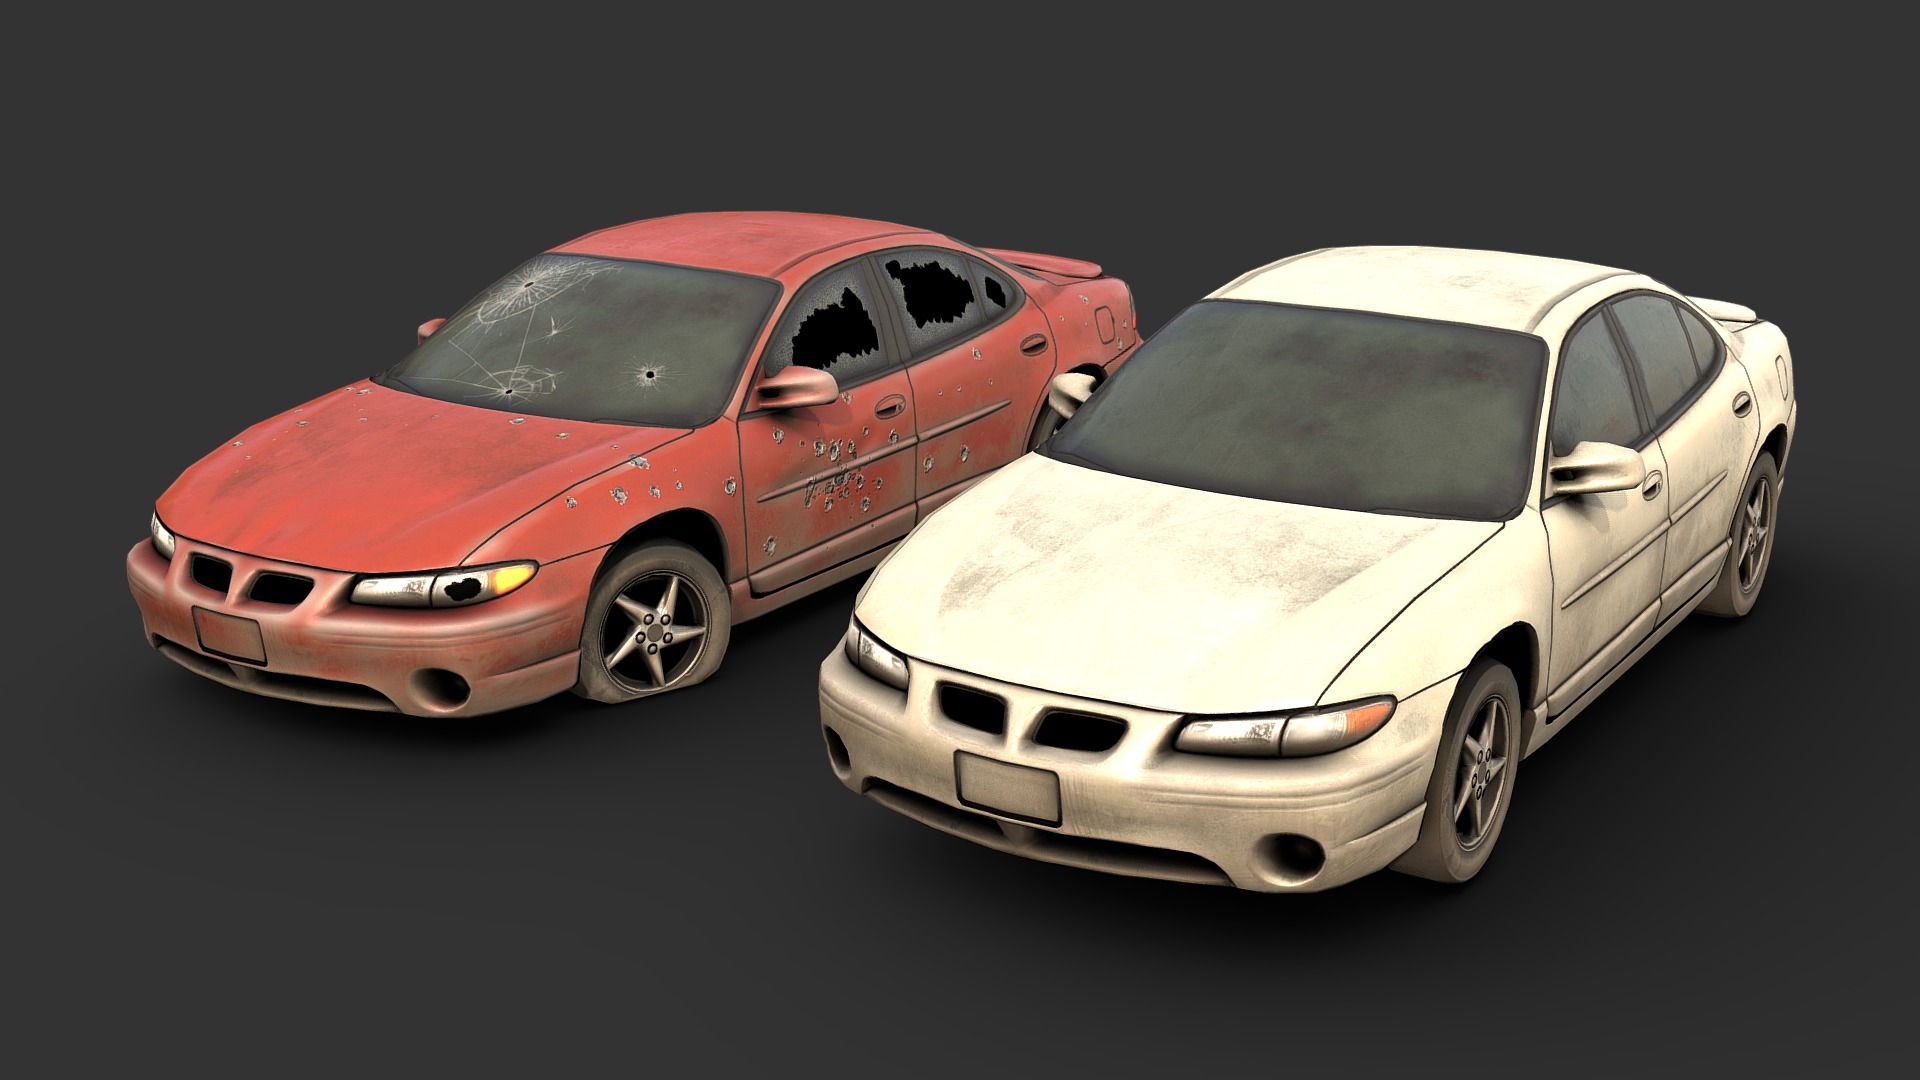 3D model 1997 Midsize Sedan - This is a 3D model of the 1997 Midsize Sedan. The 3D model is about a couple of cars parked next to each other.